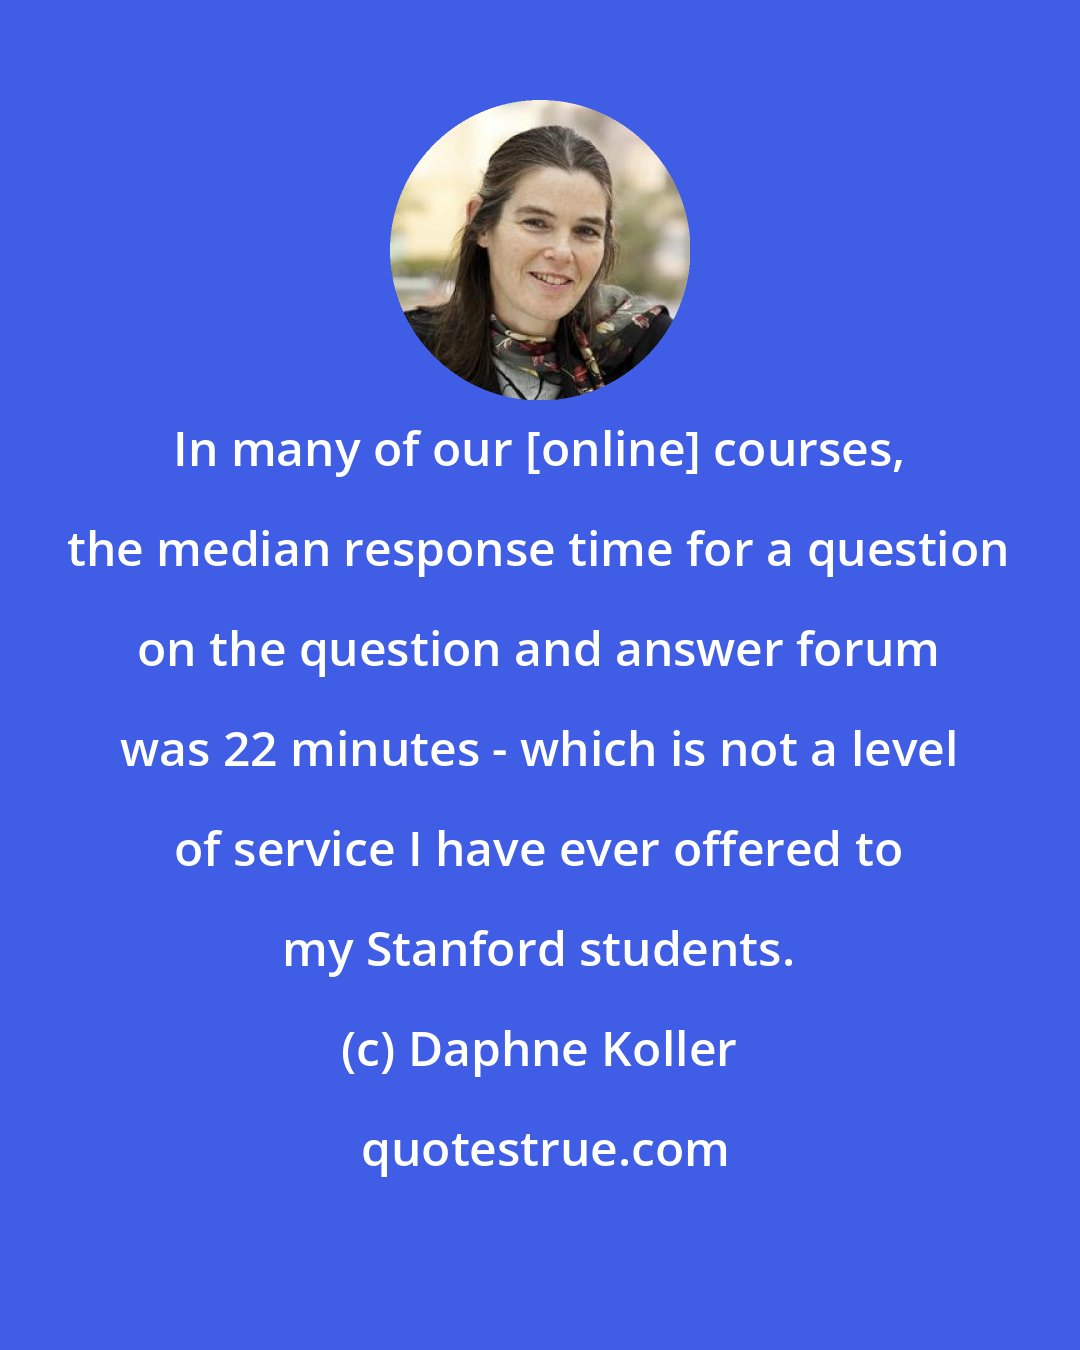 Daphne Koller: In many of our [online] courses, the median response time for a question on the question and answer forum was 22 minutes - which is not a level of service I have ever offered to my Stanford students.